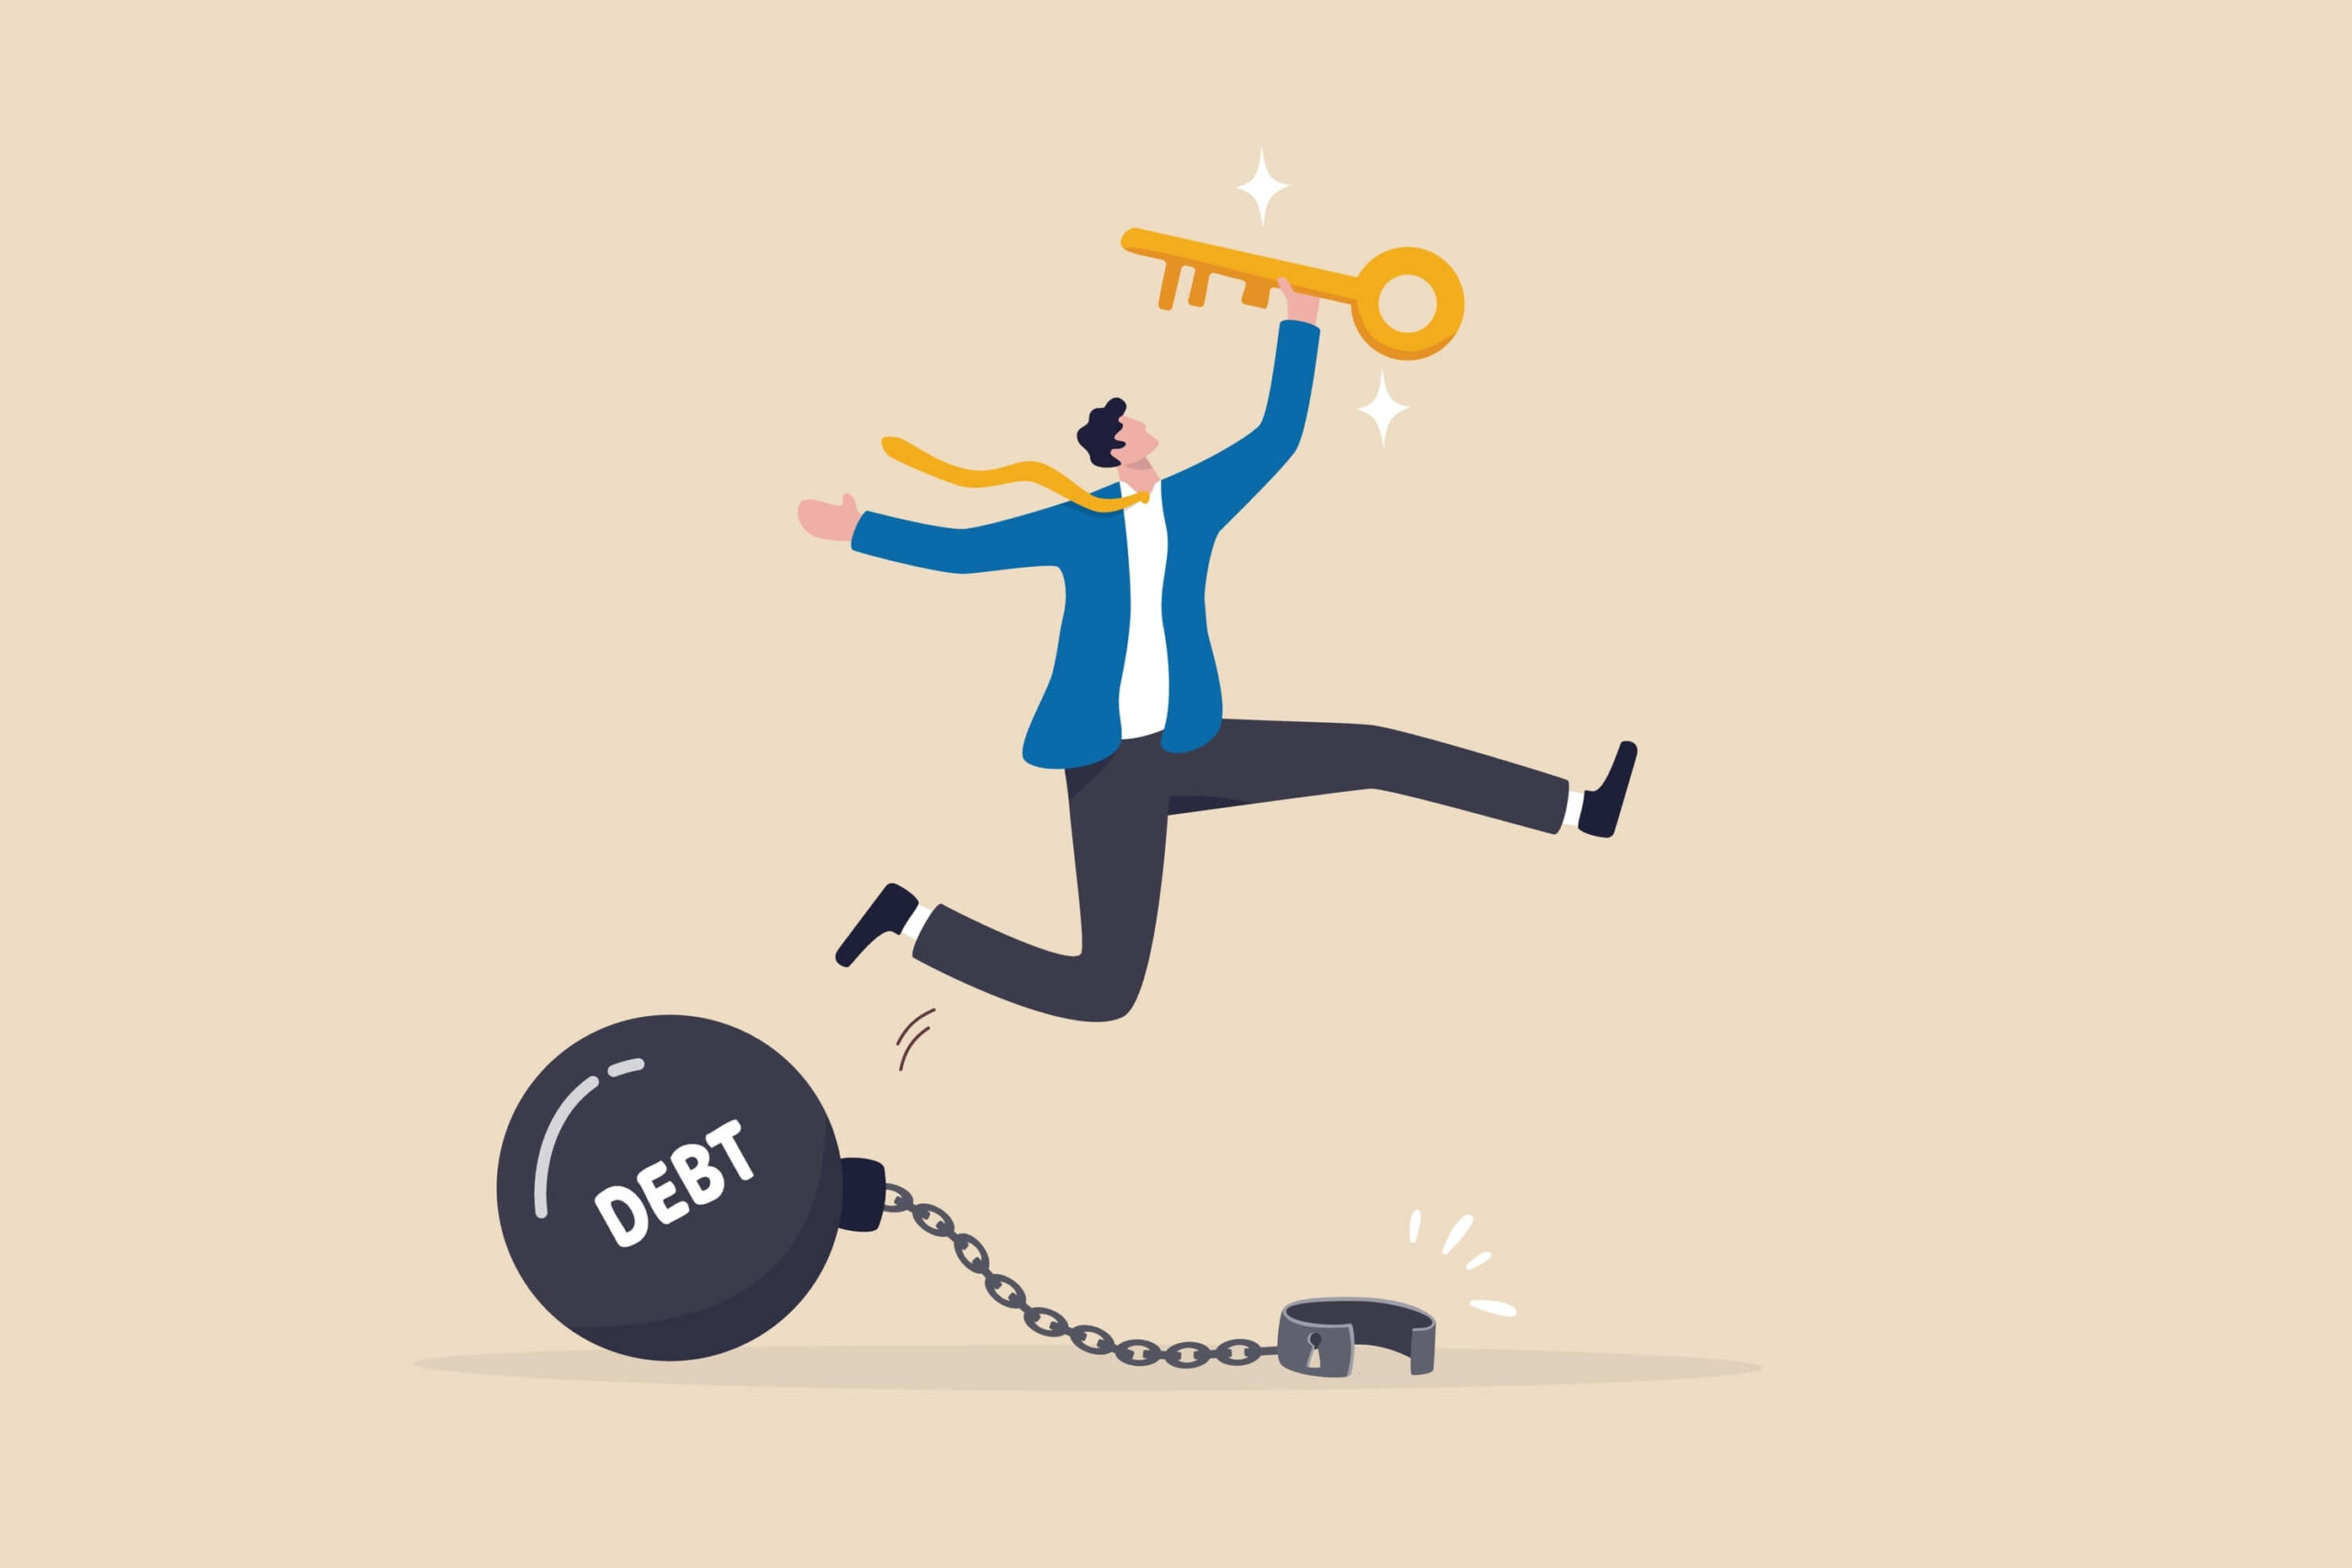 A cartoon man jumping in the air while holding a big golden key and behind the man is a ball and chain that says debt